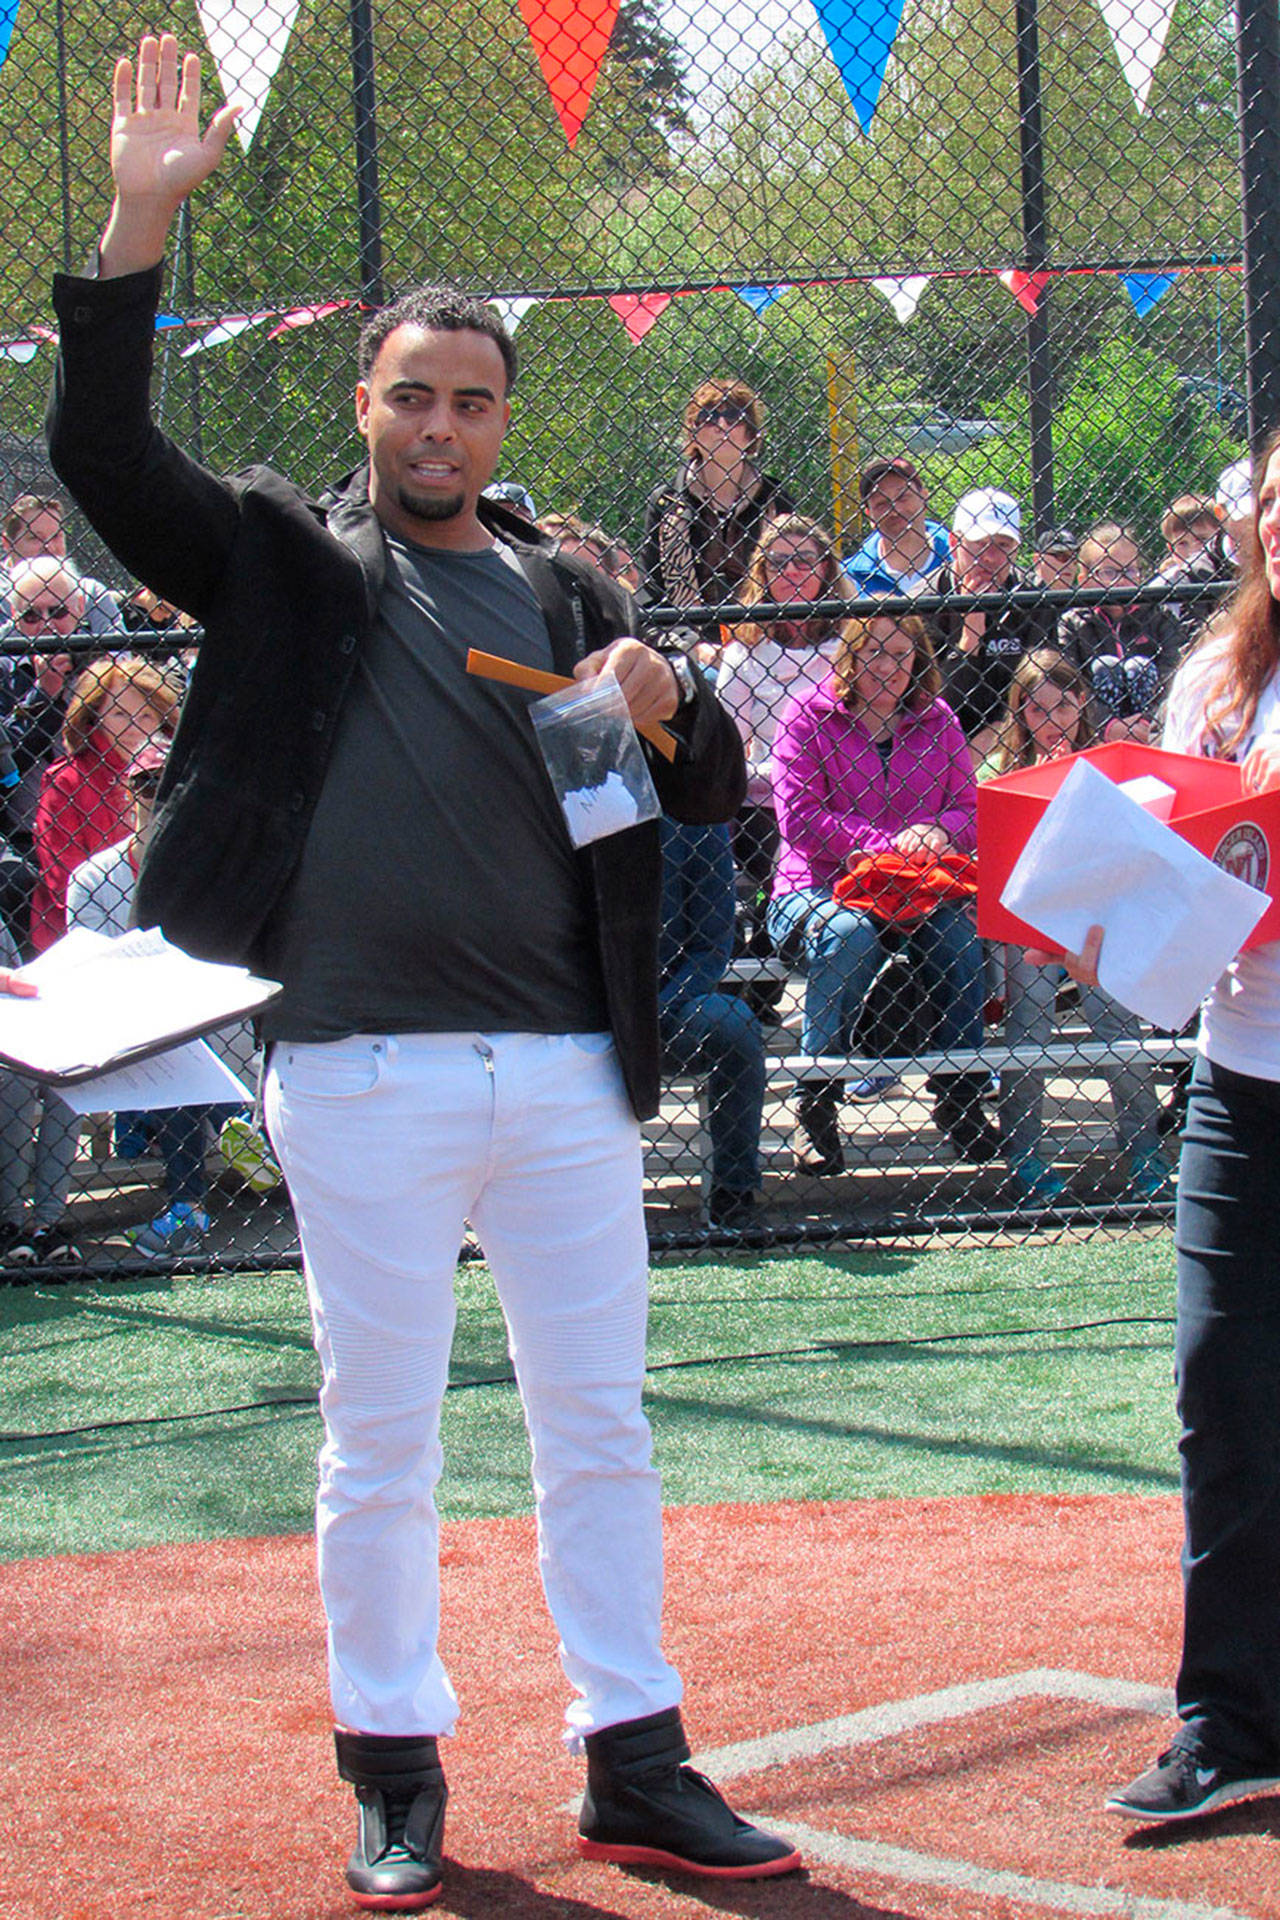 Seattle Mariners baseball player Nelson Cruz greets the crowd at the annual Mercer Island Little League opening day ceremony on May 6 at the South Mercer Playfields. Photo courtesy of Kym Otte